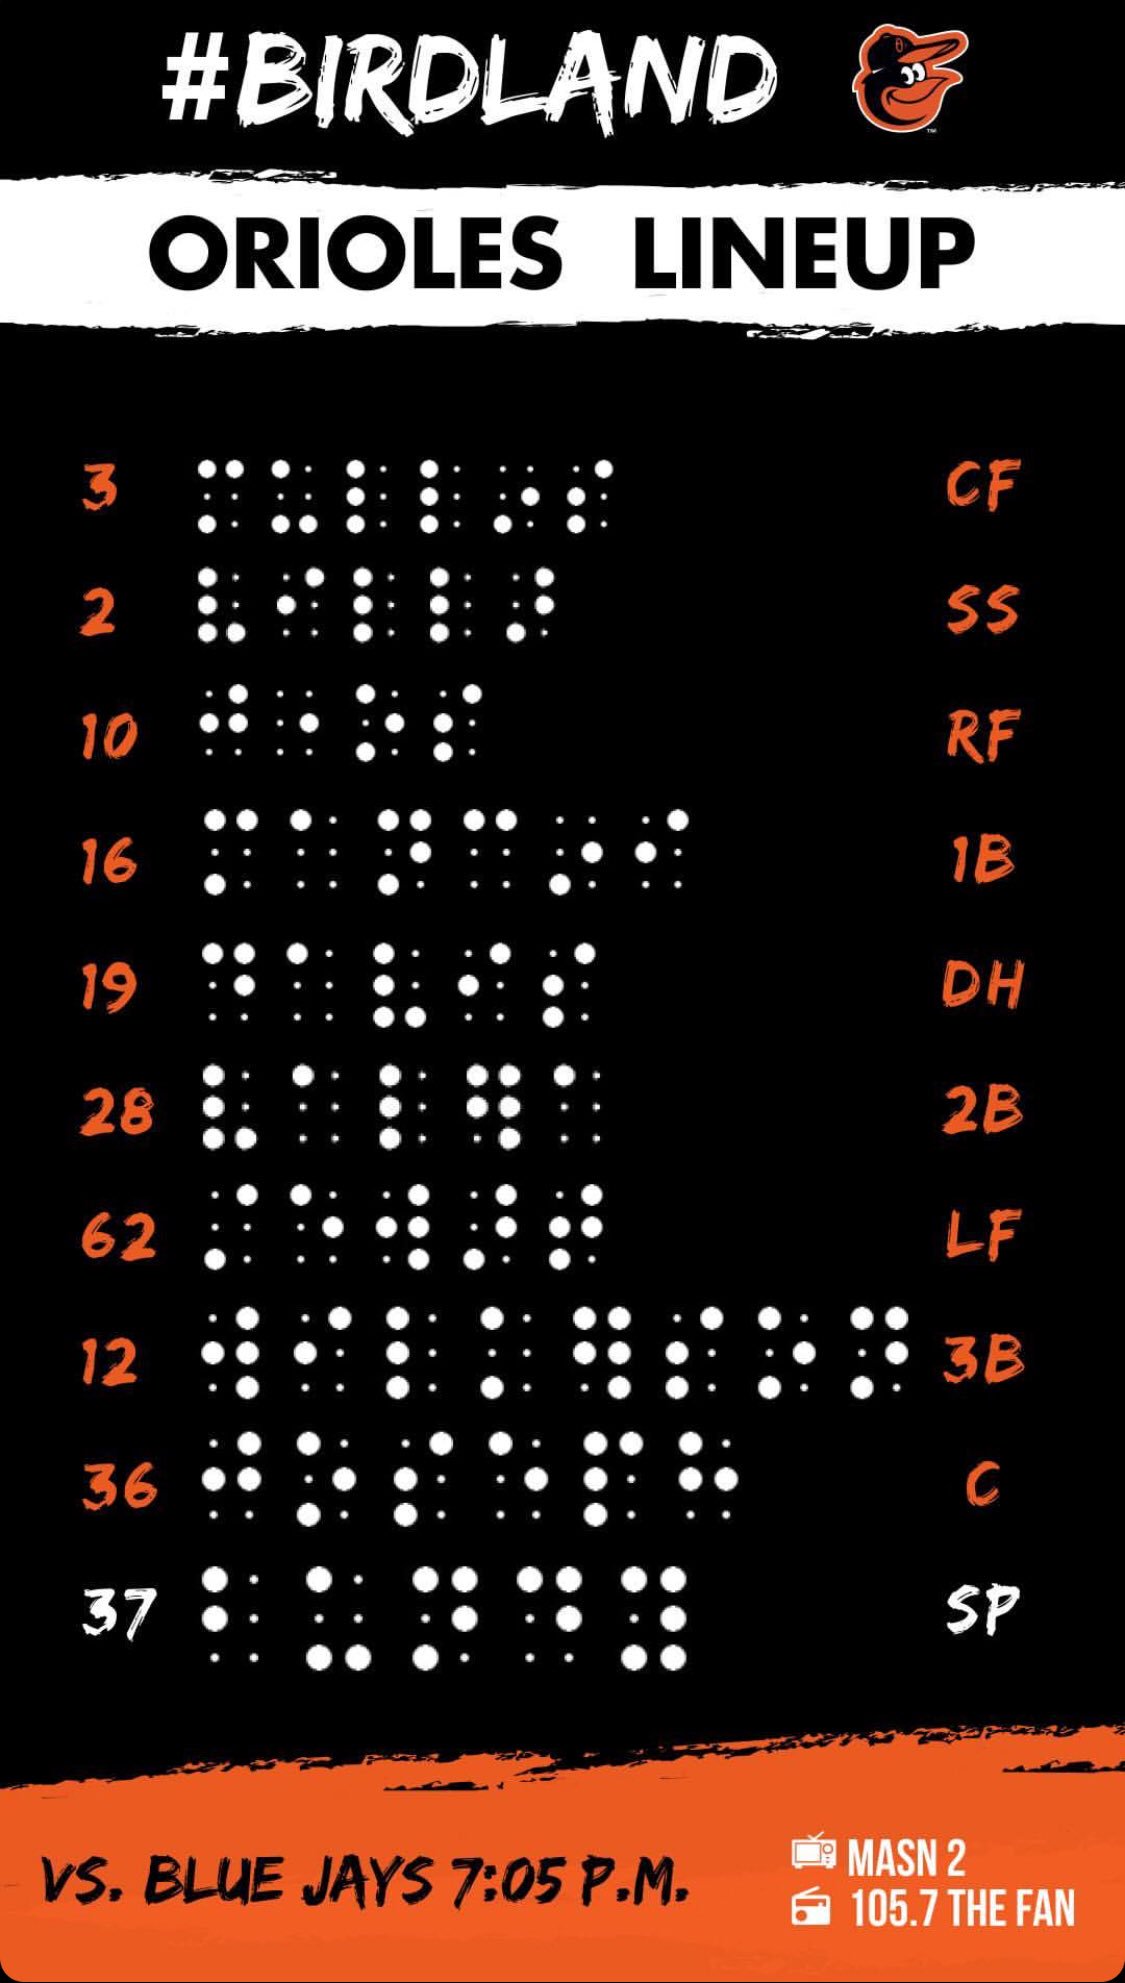 Braille jerseys at Camden Yards met with praise and criticism / X